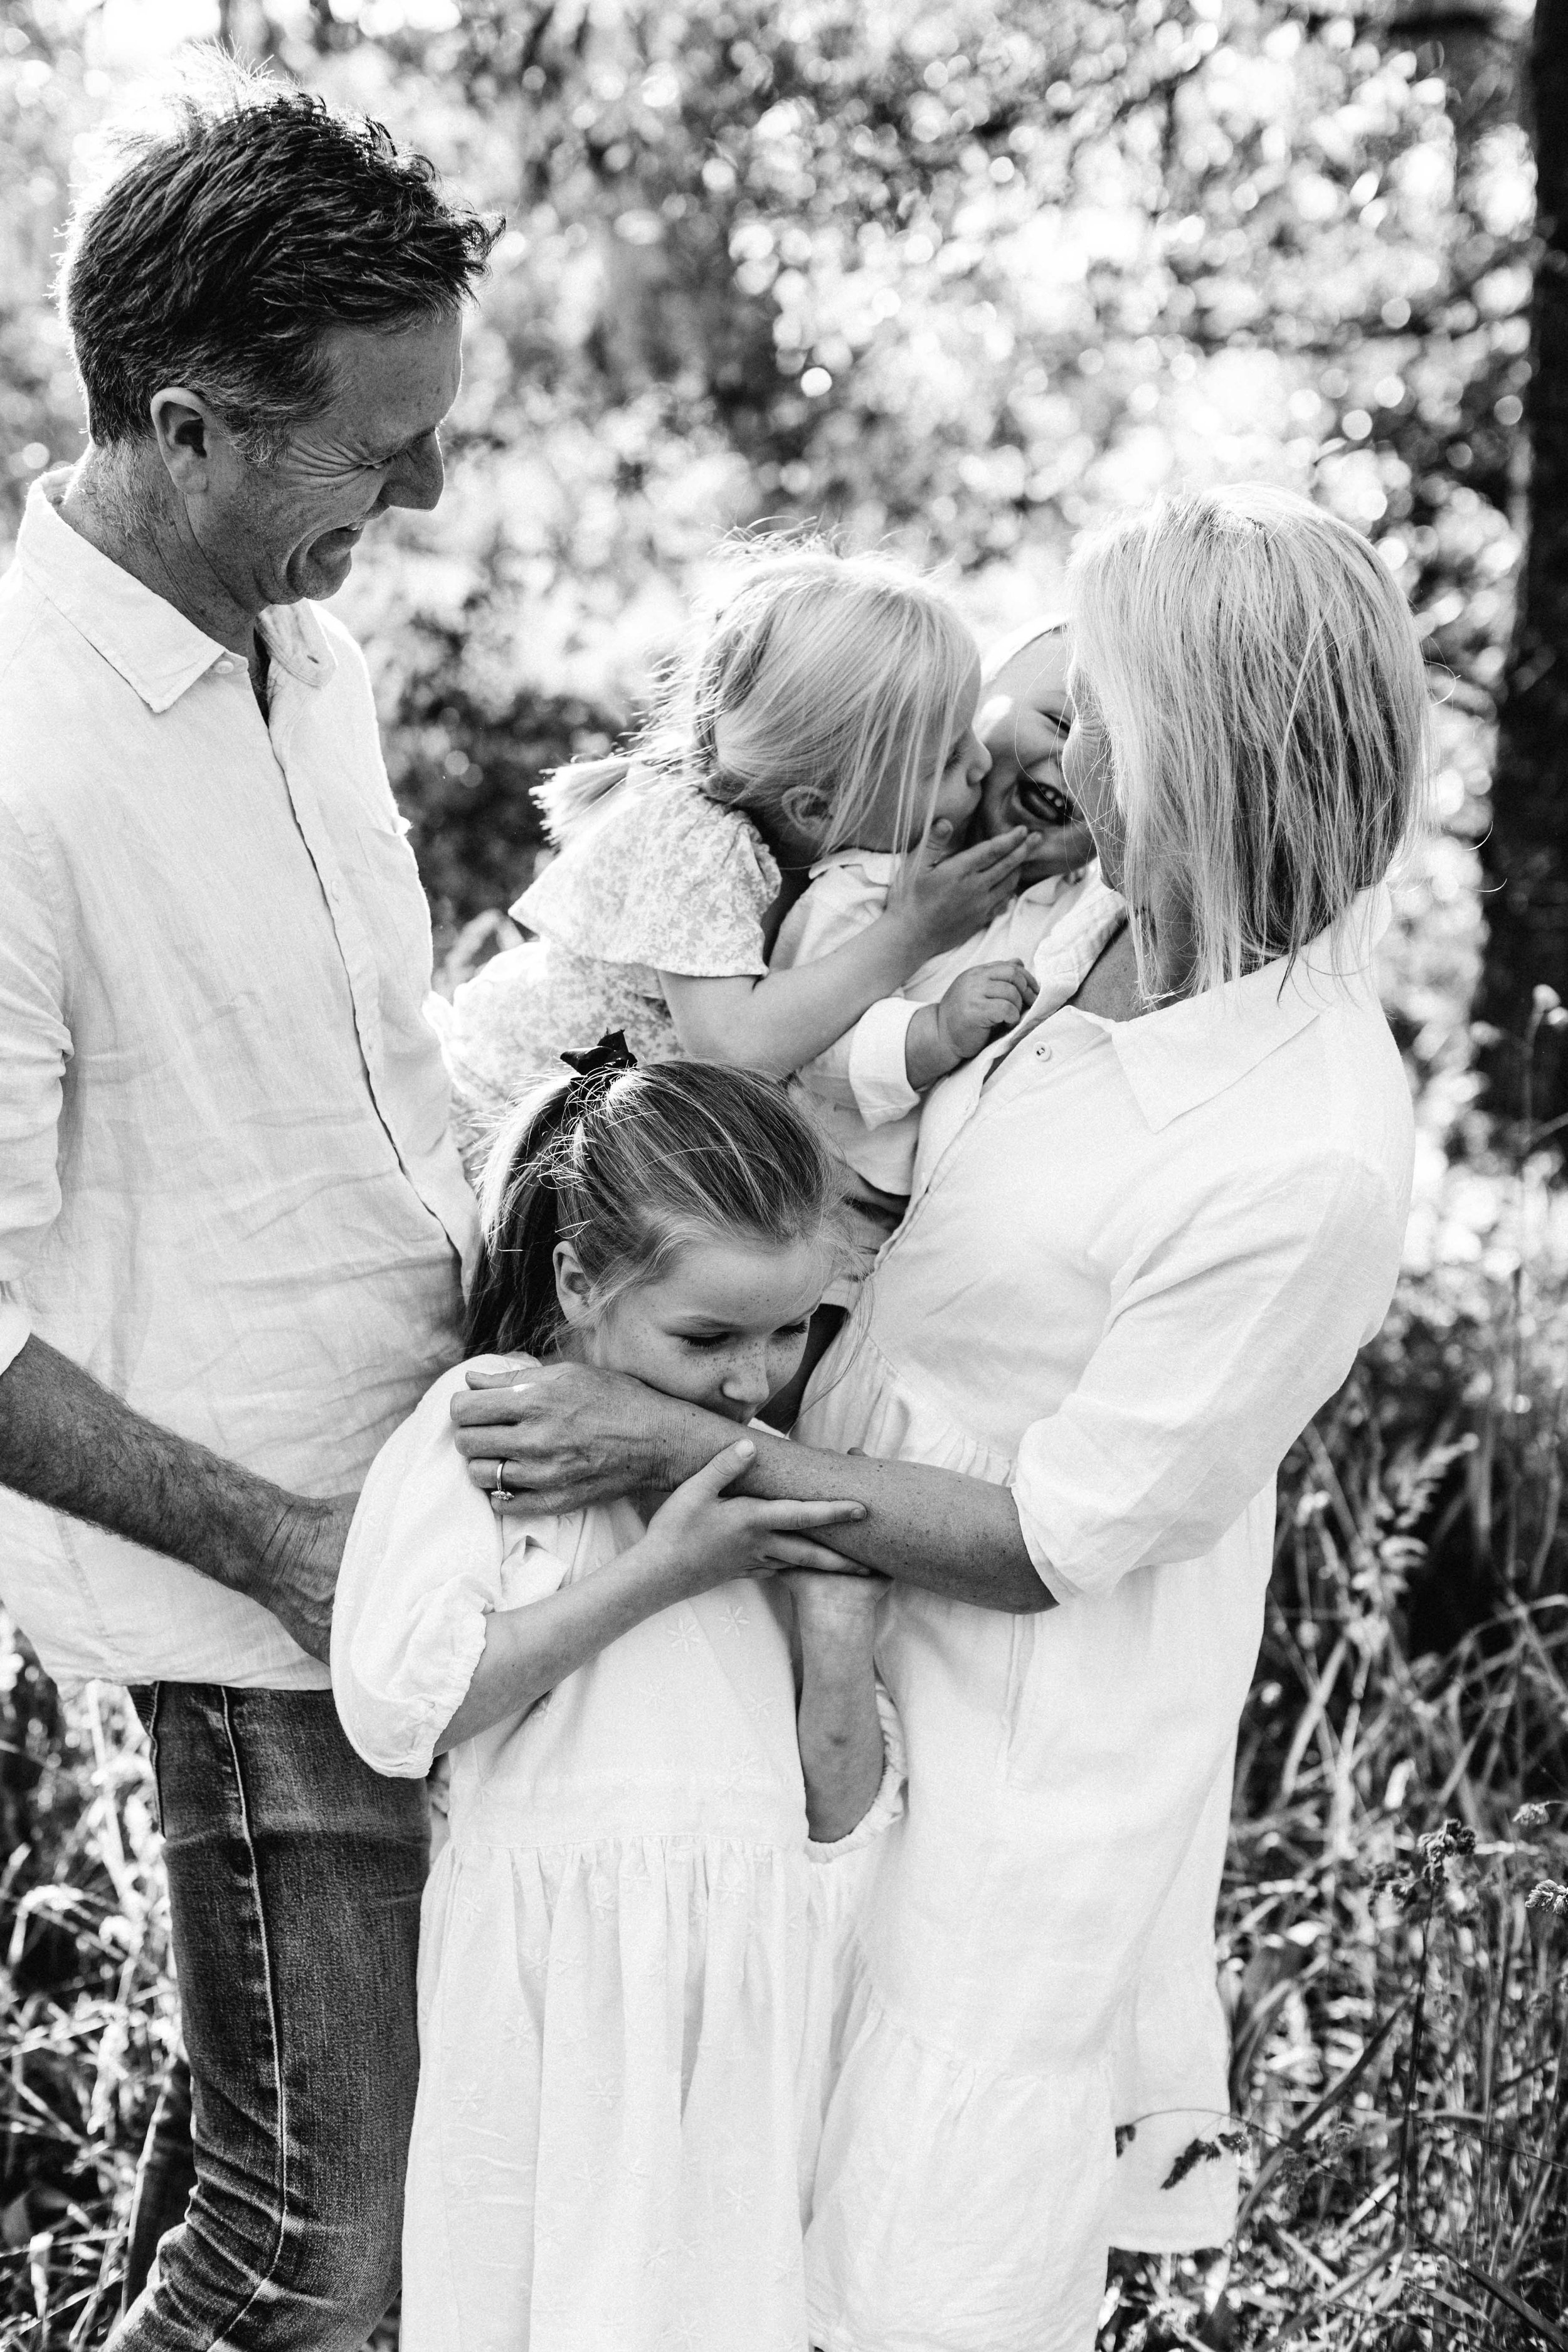 poole-family-bowral-southern-highlands-inhome-family-lifestyle-wollondilly-camden-macarthur-sydney-photography-www.emilyobrienphotography.net-30.jpg